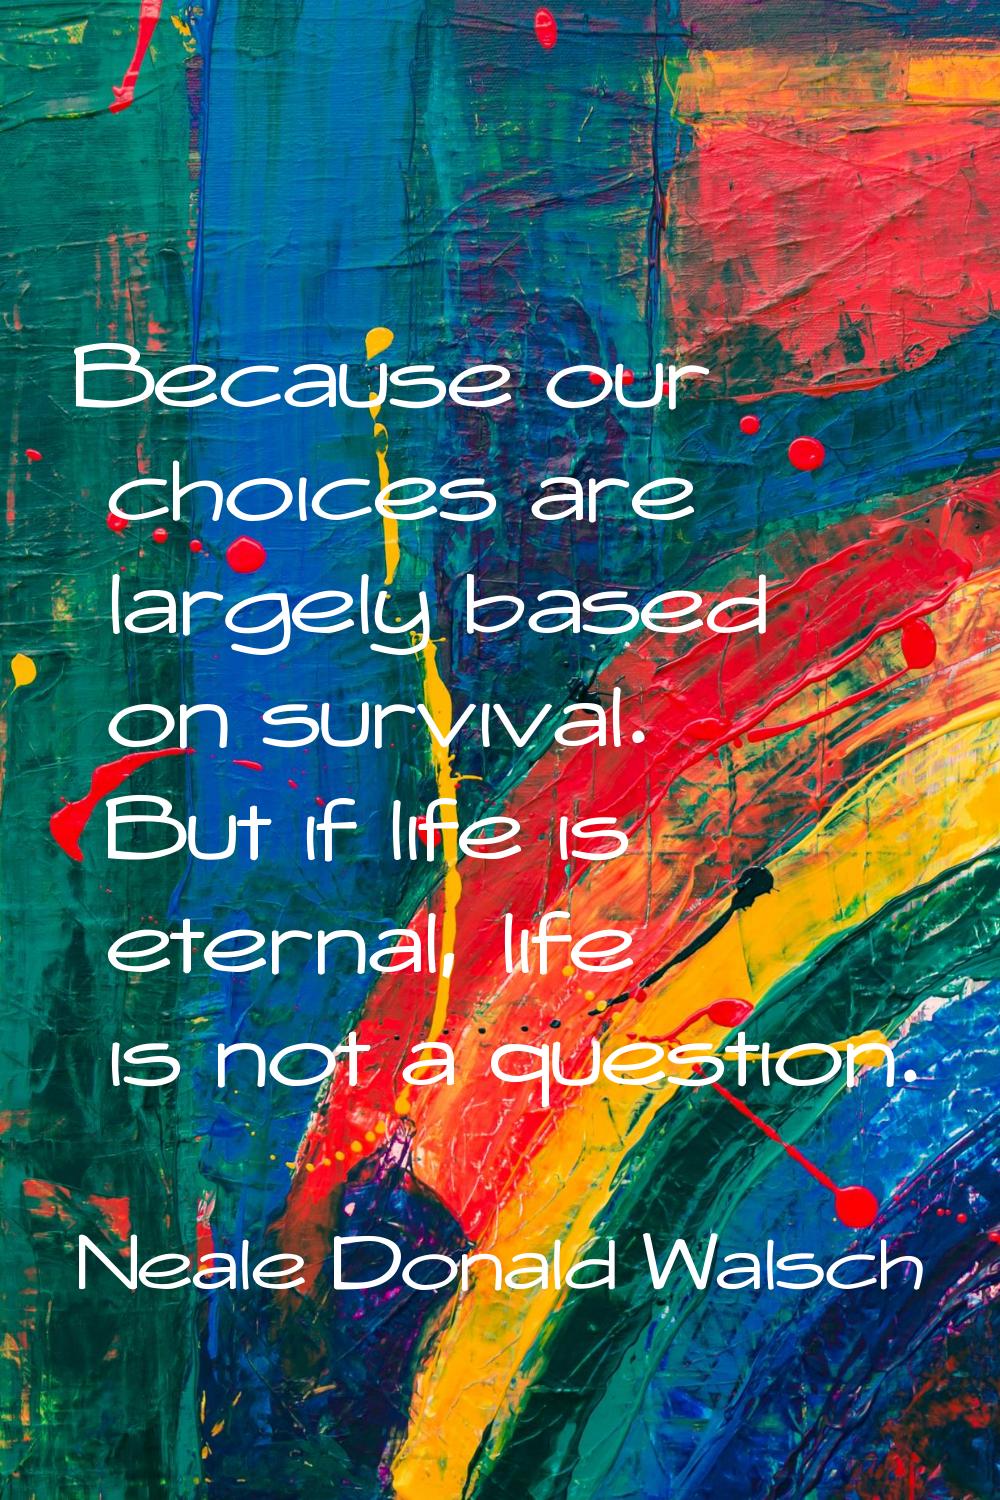 Because our choices are largely based on survival. But if life is eternal, life is not a question.